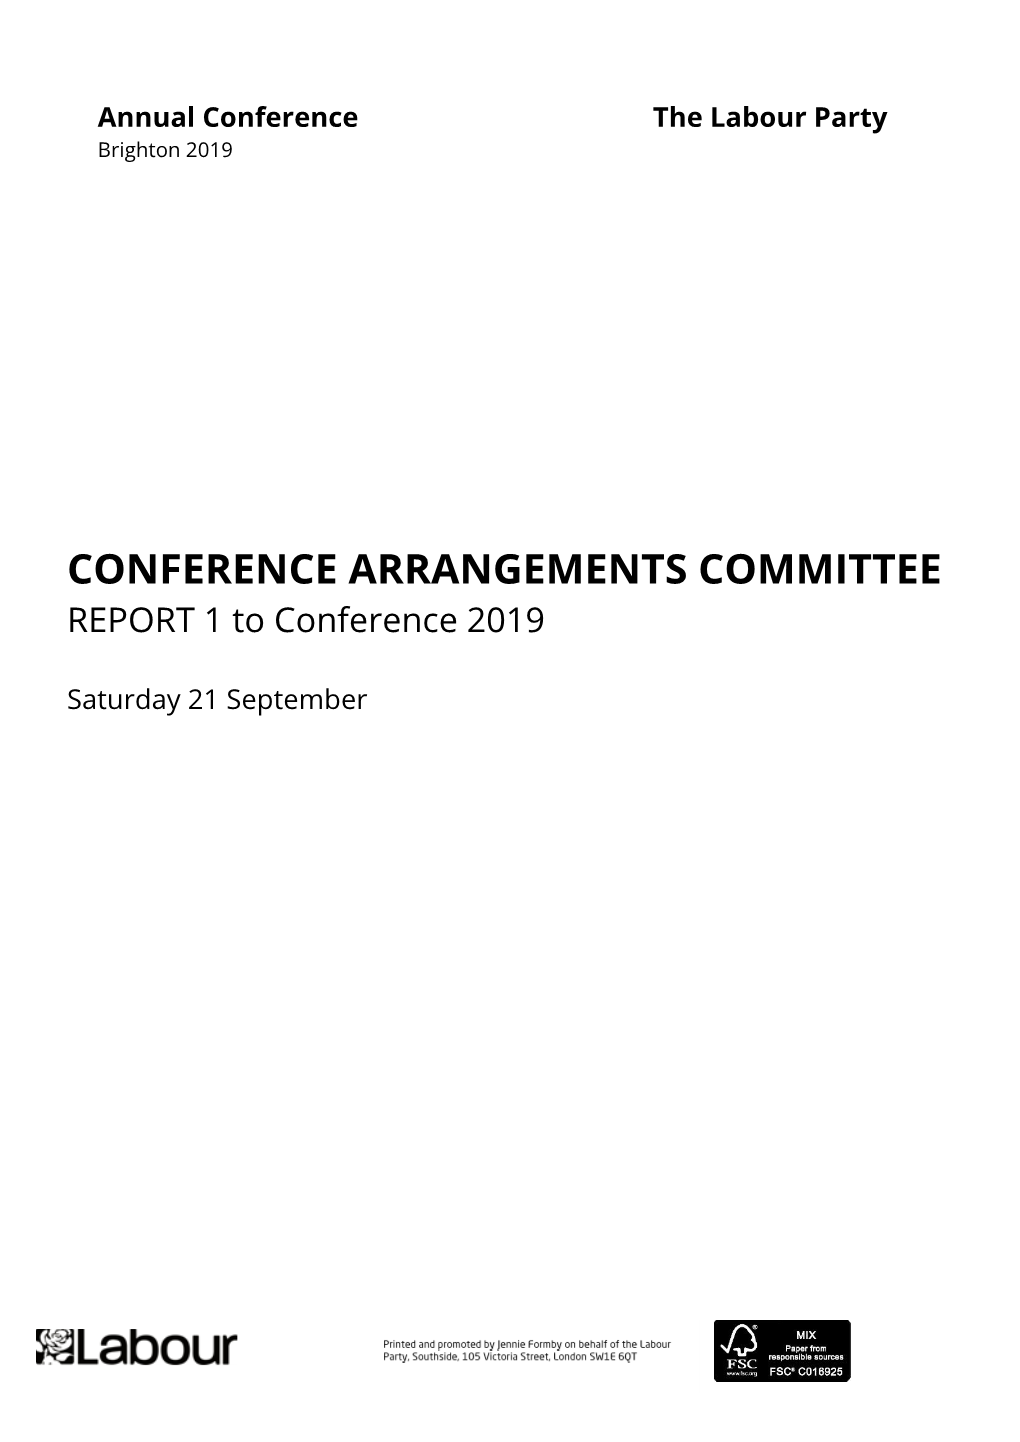 CONFERENCE ARRANGEMENTS COMMITTEE REPORT 1 to Conference 2019